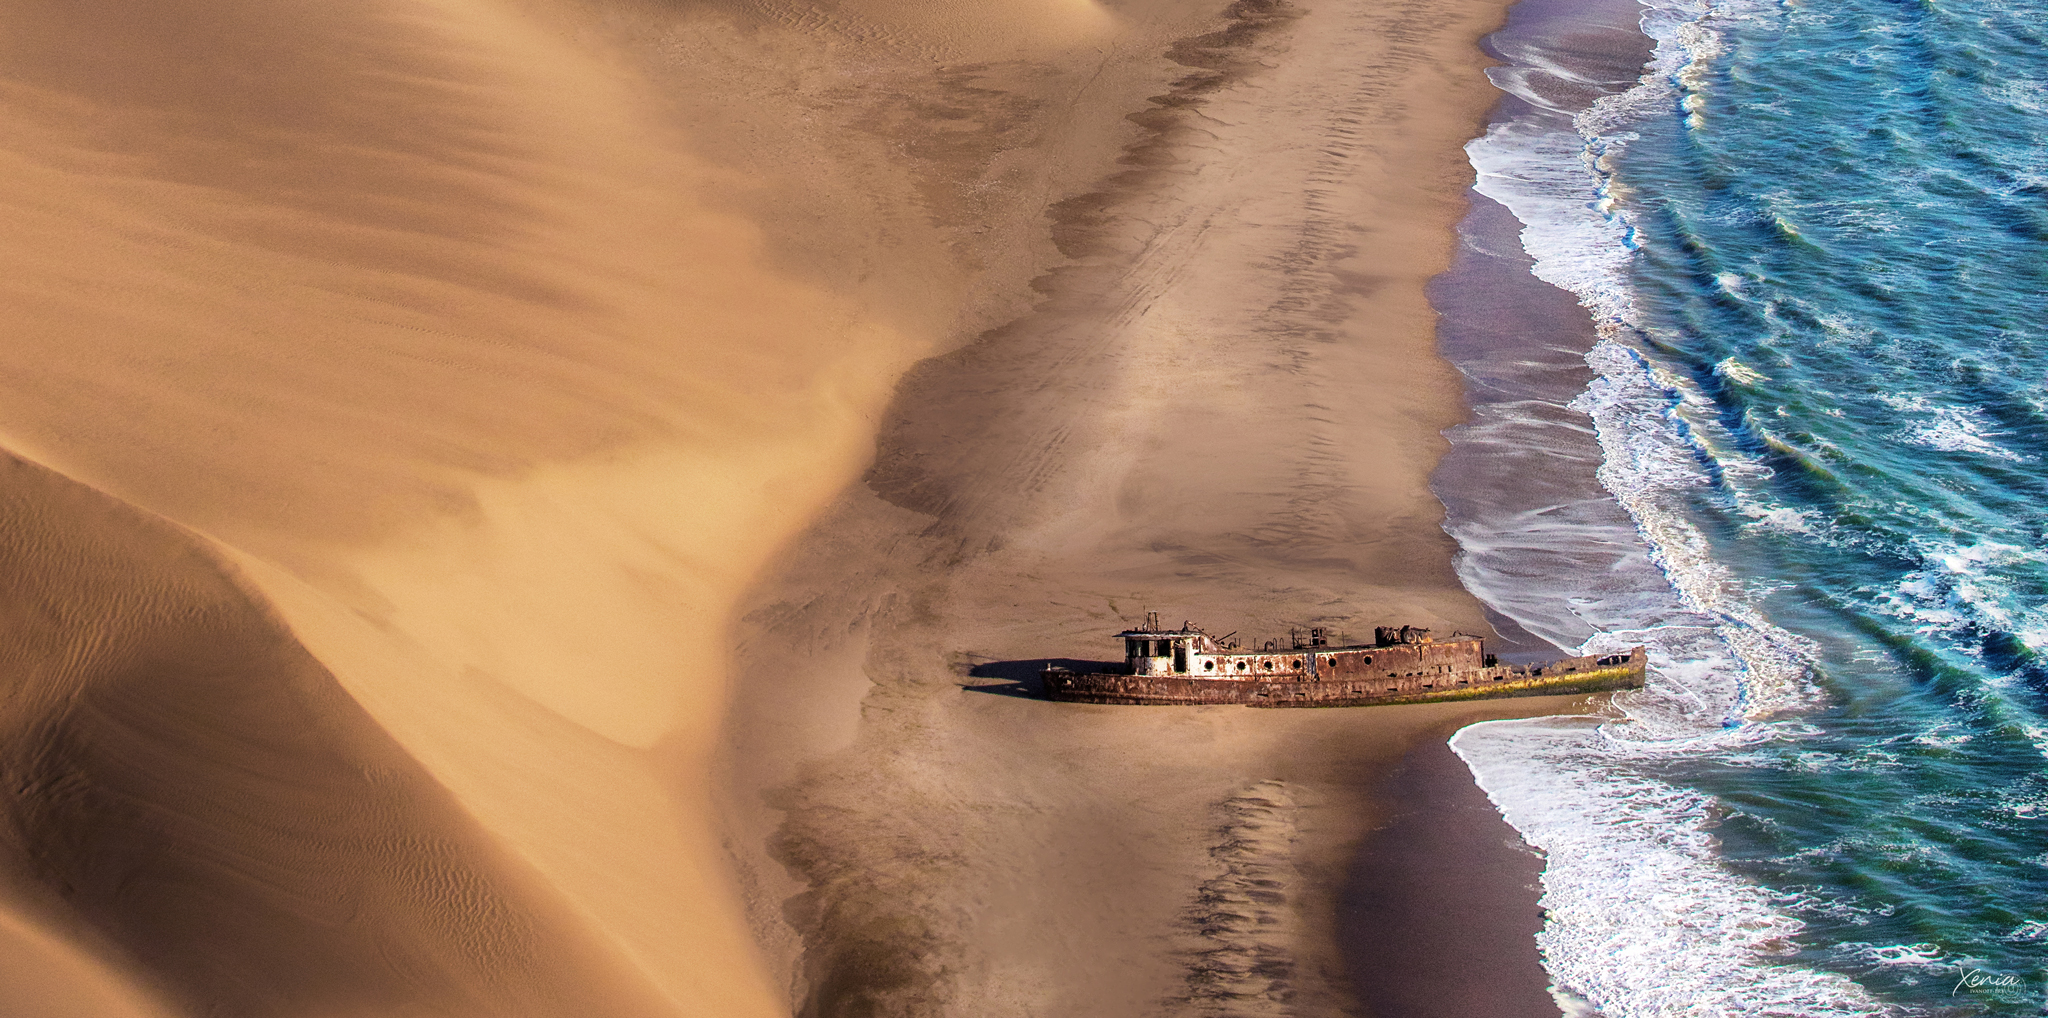 Journey to the Most Inhospitable Place on Earth: The Skeleton Coast